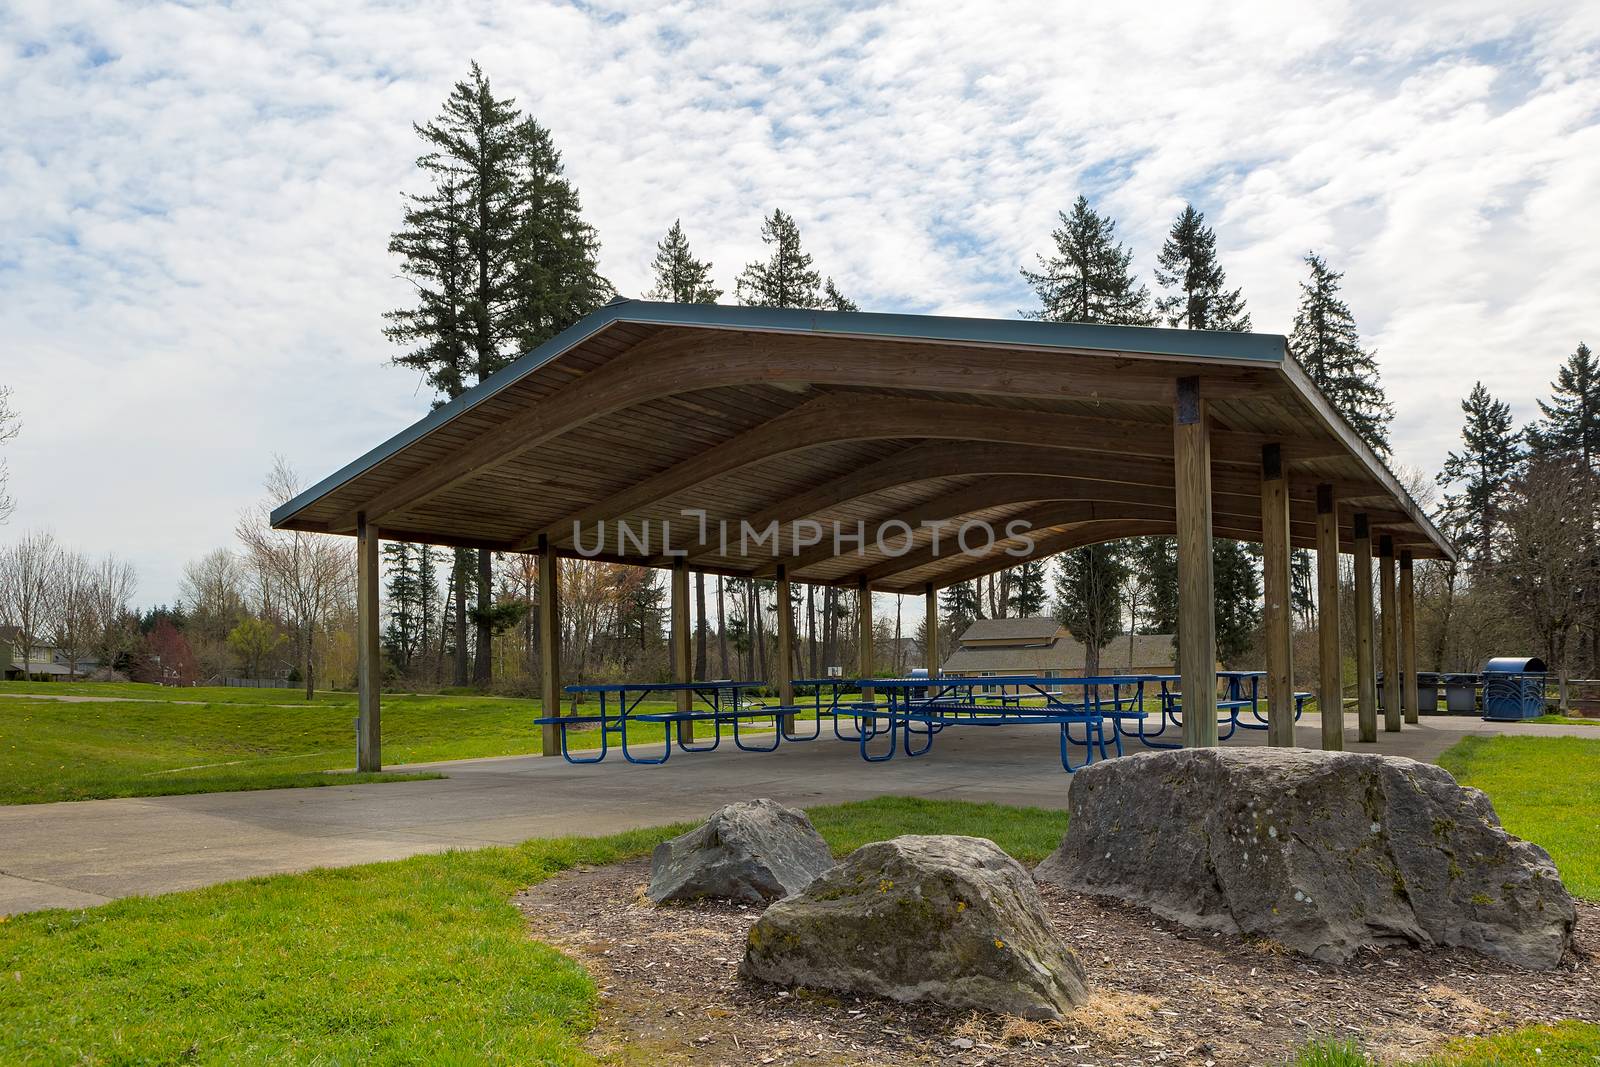 Picnic tables under wood shelter structure in suburban neighborhood city park